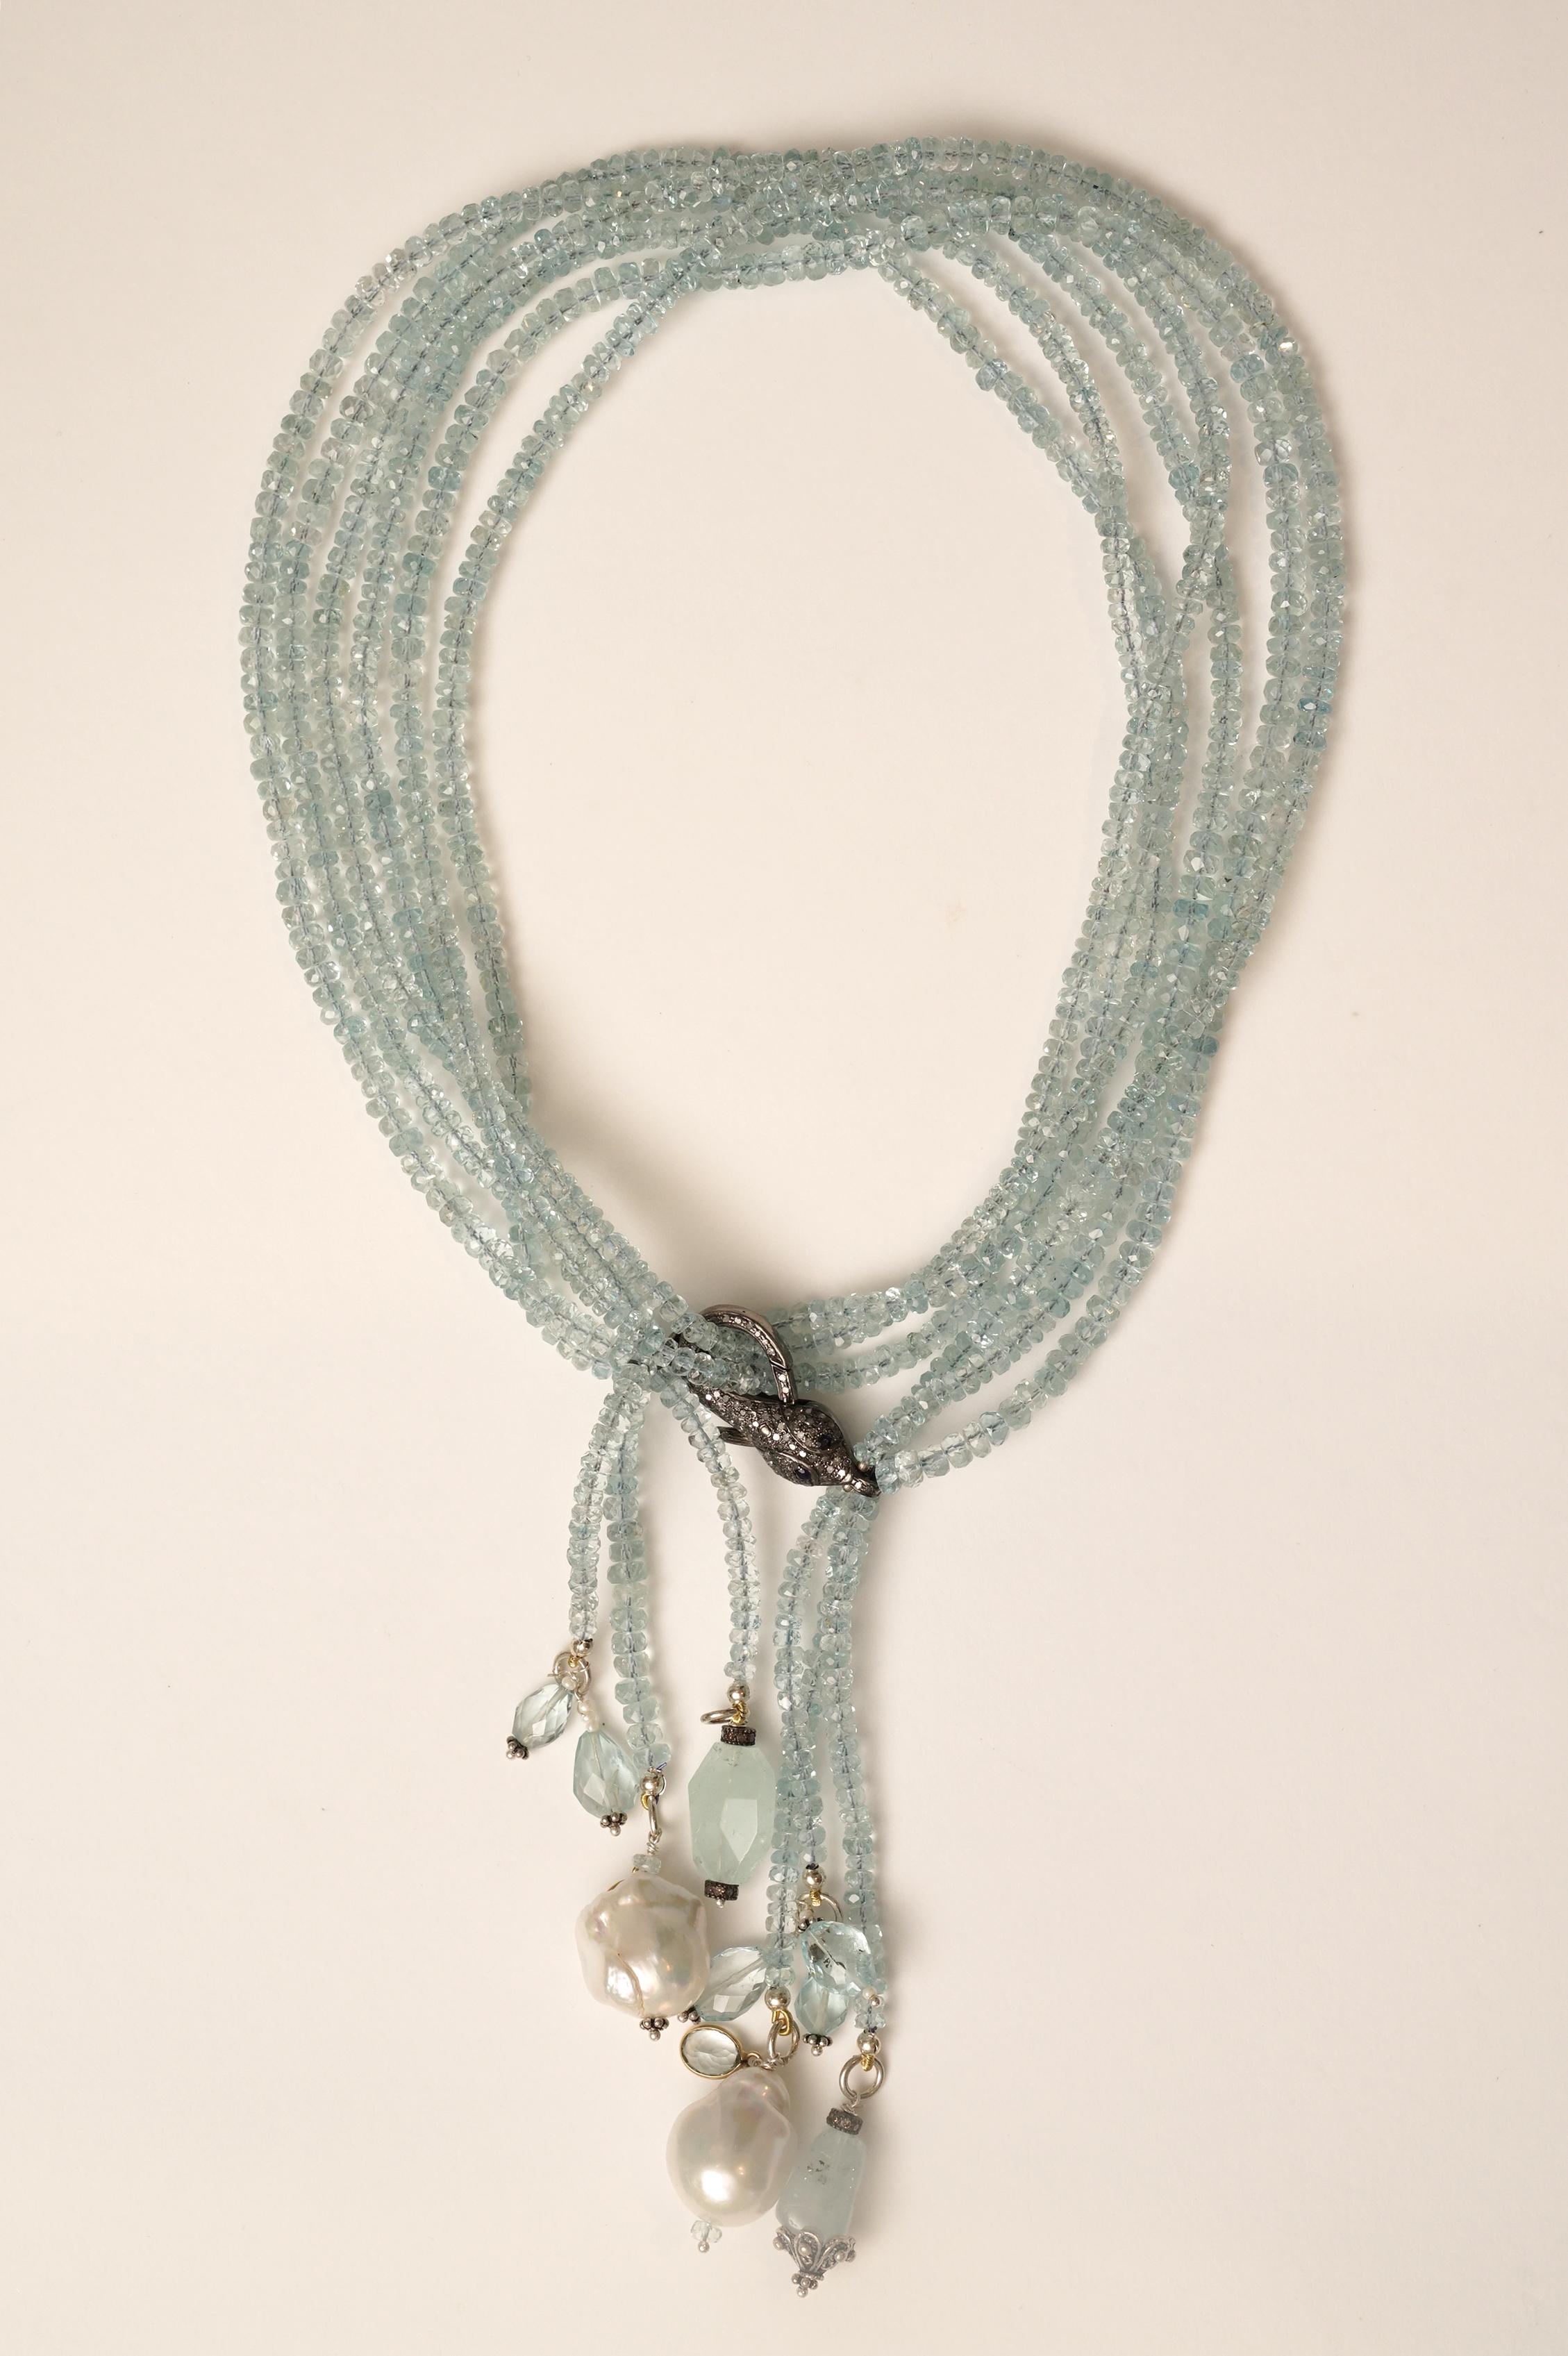 A multi-strand necklace of faceted and fine aquamarines which can be worn long, or doubled and worn short.  When doubled 16.5 inches long.  The assortment of pendants includes baroque pearls, sterling pendants and diamond rondelles and average 4